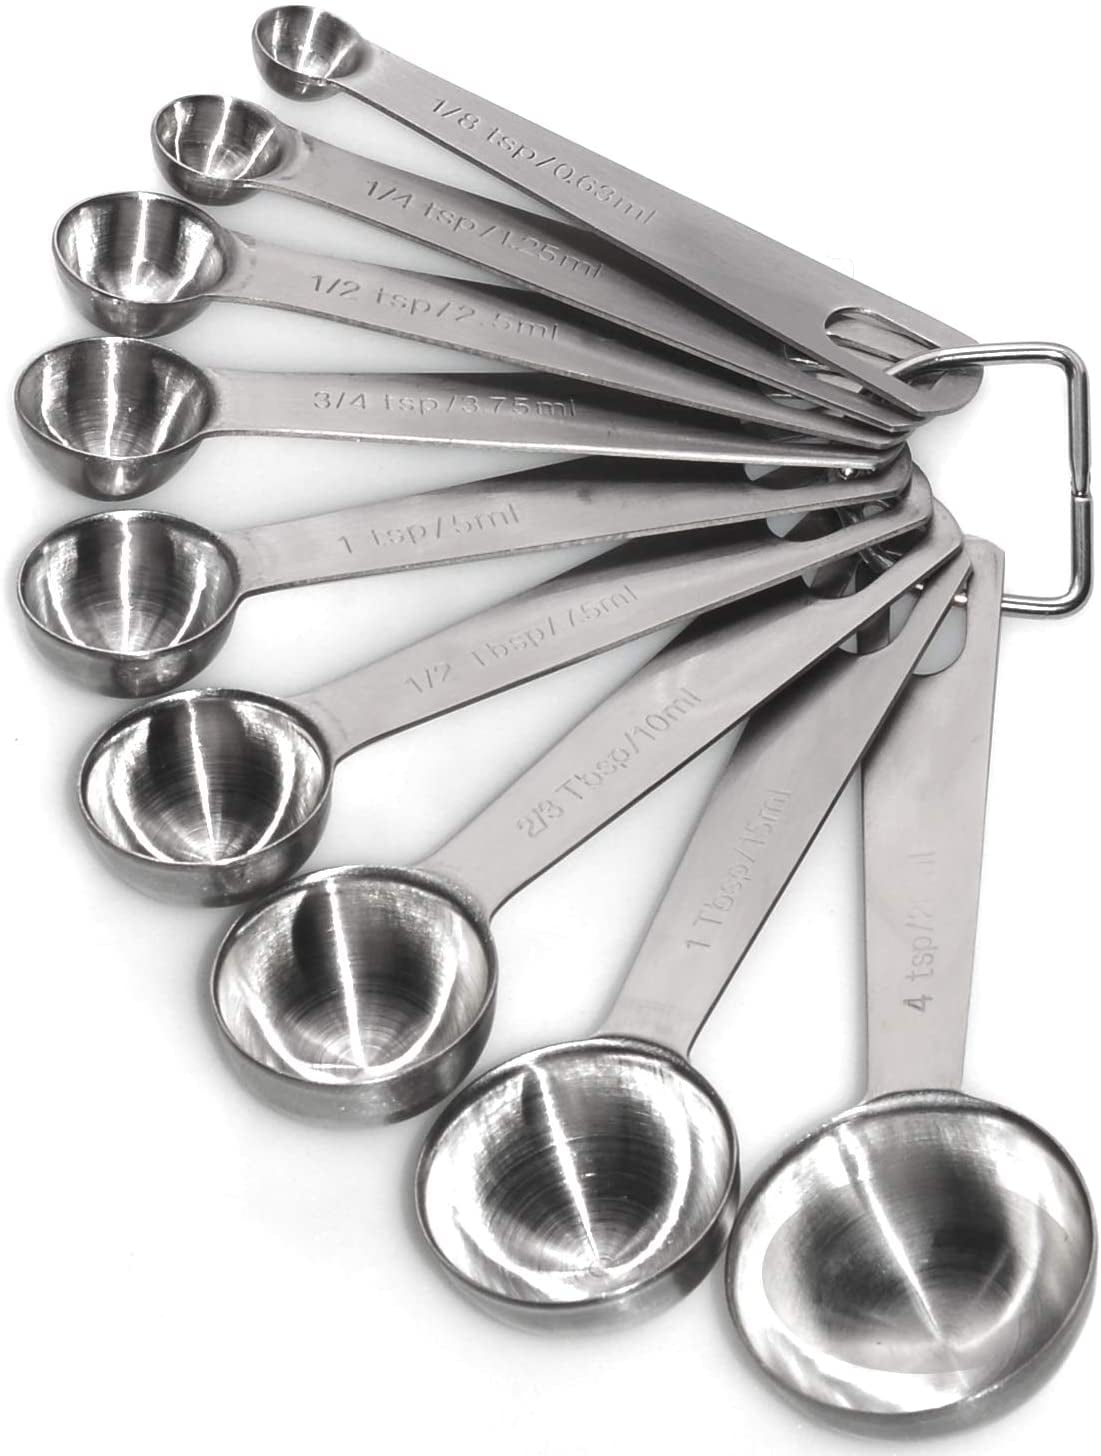 Heavy Duty Stainless Steel Metal Measuring Spoons Commercial Grade 